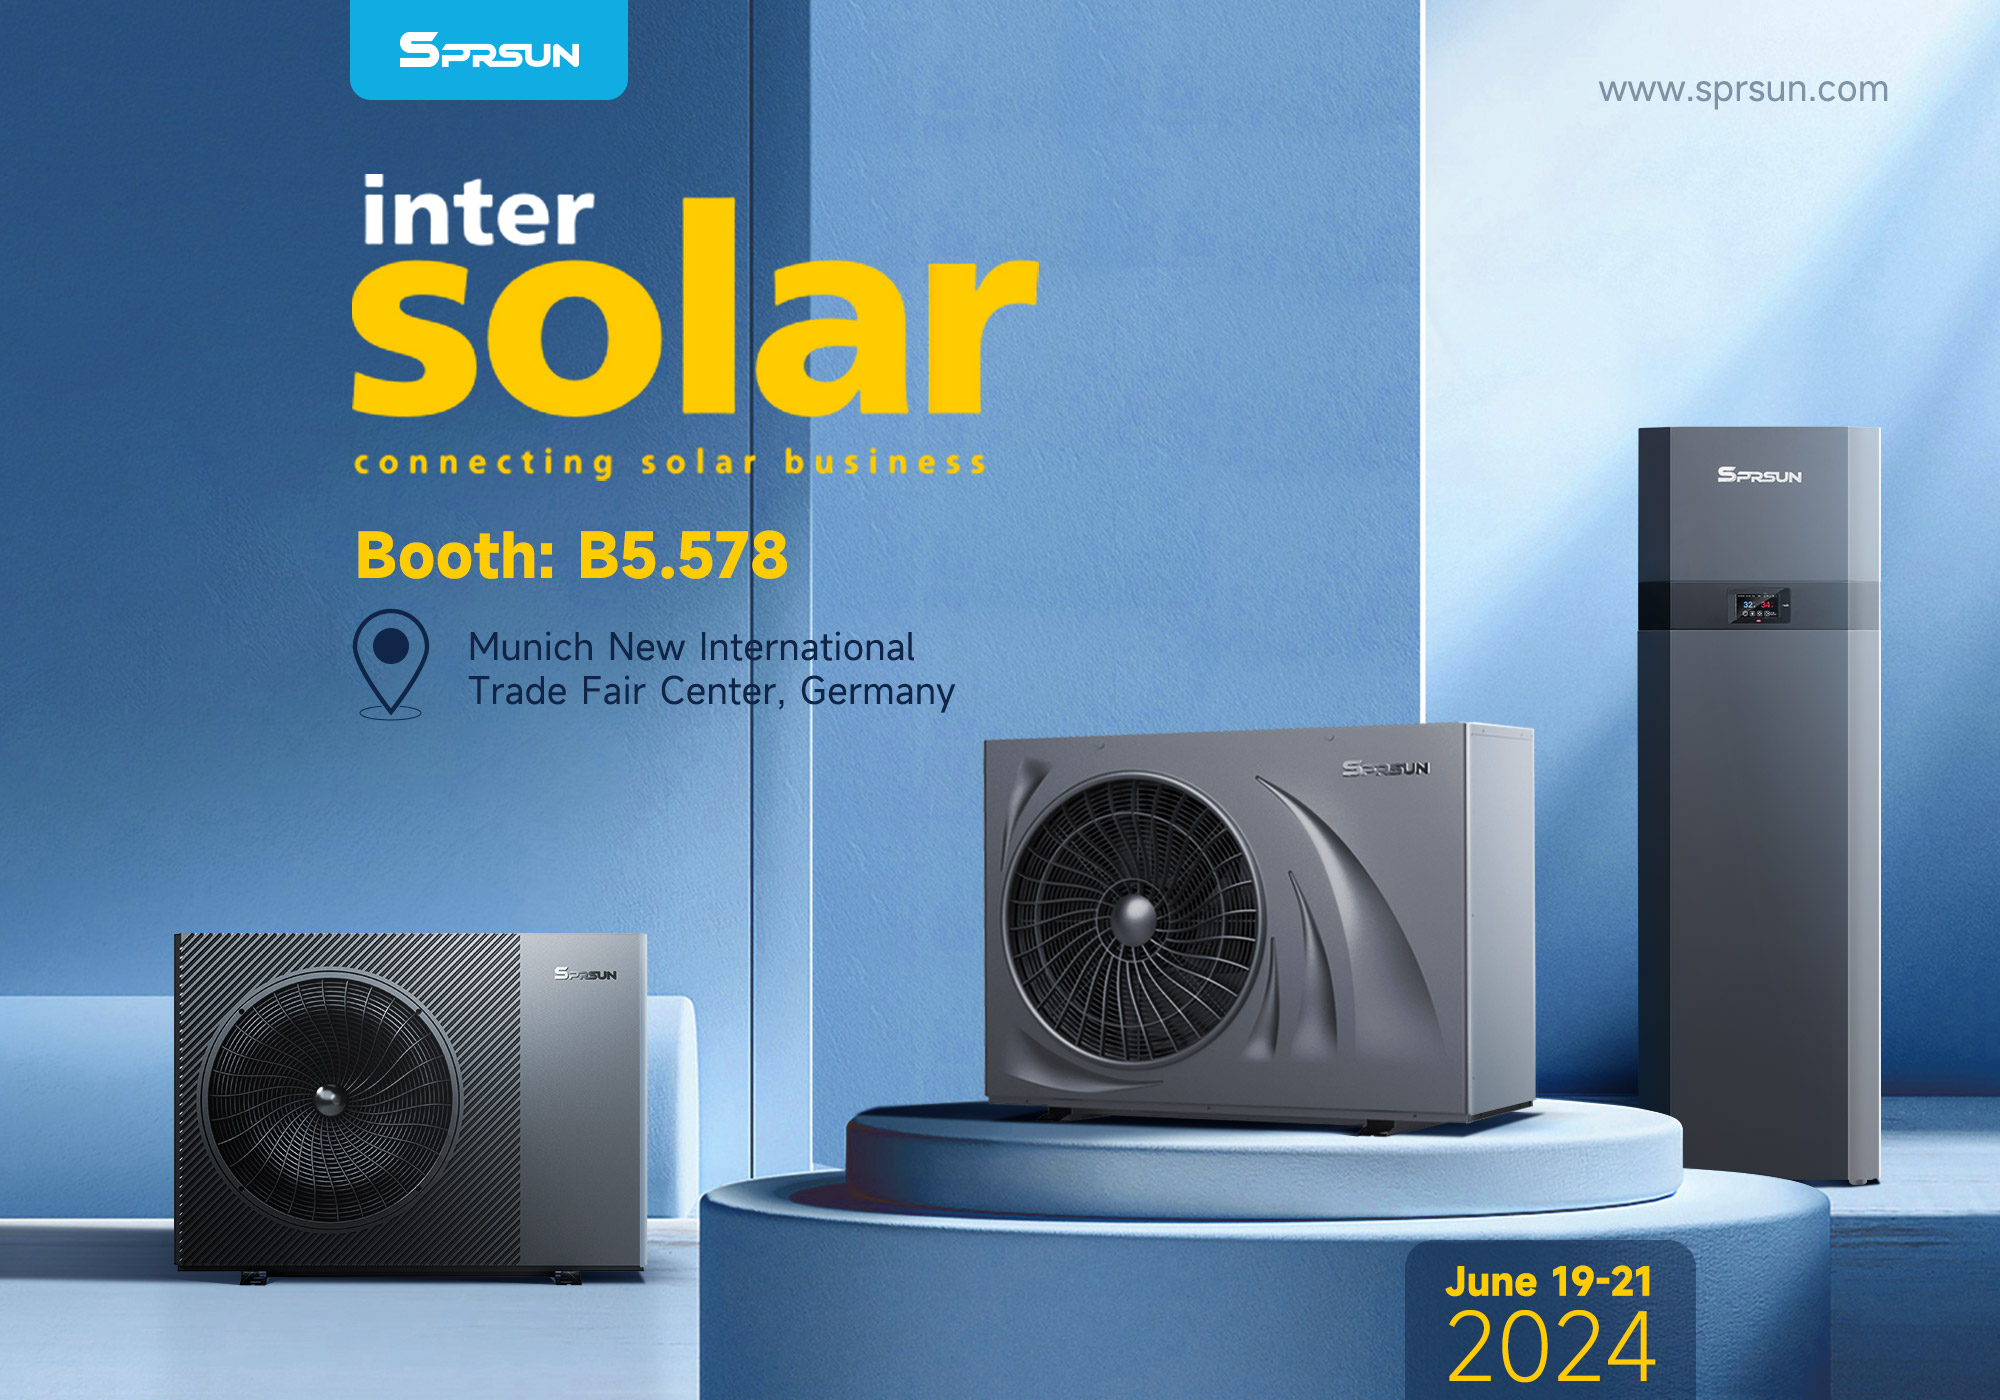 SPRSUN's Latest Products to Be Presented at Intersolar 2024 in Germany